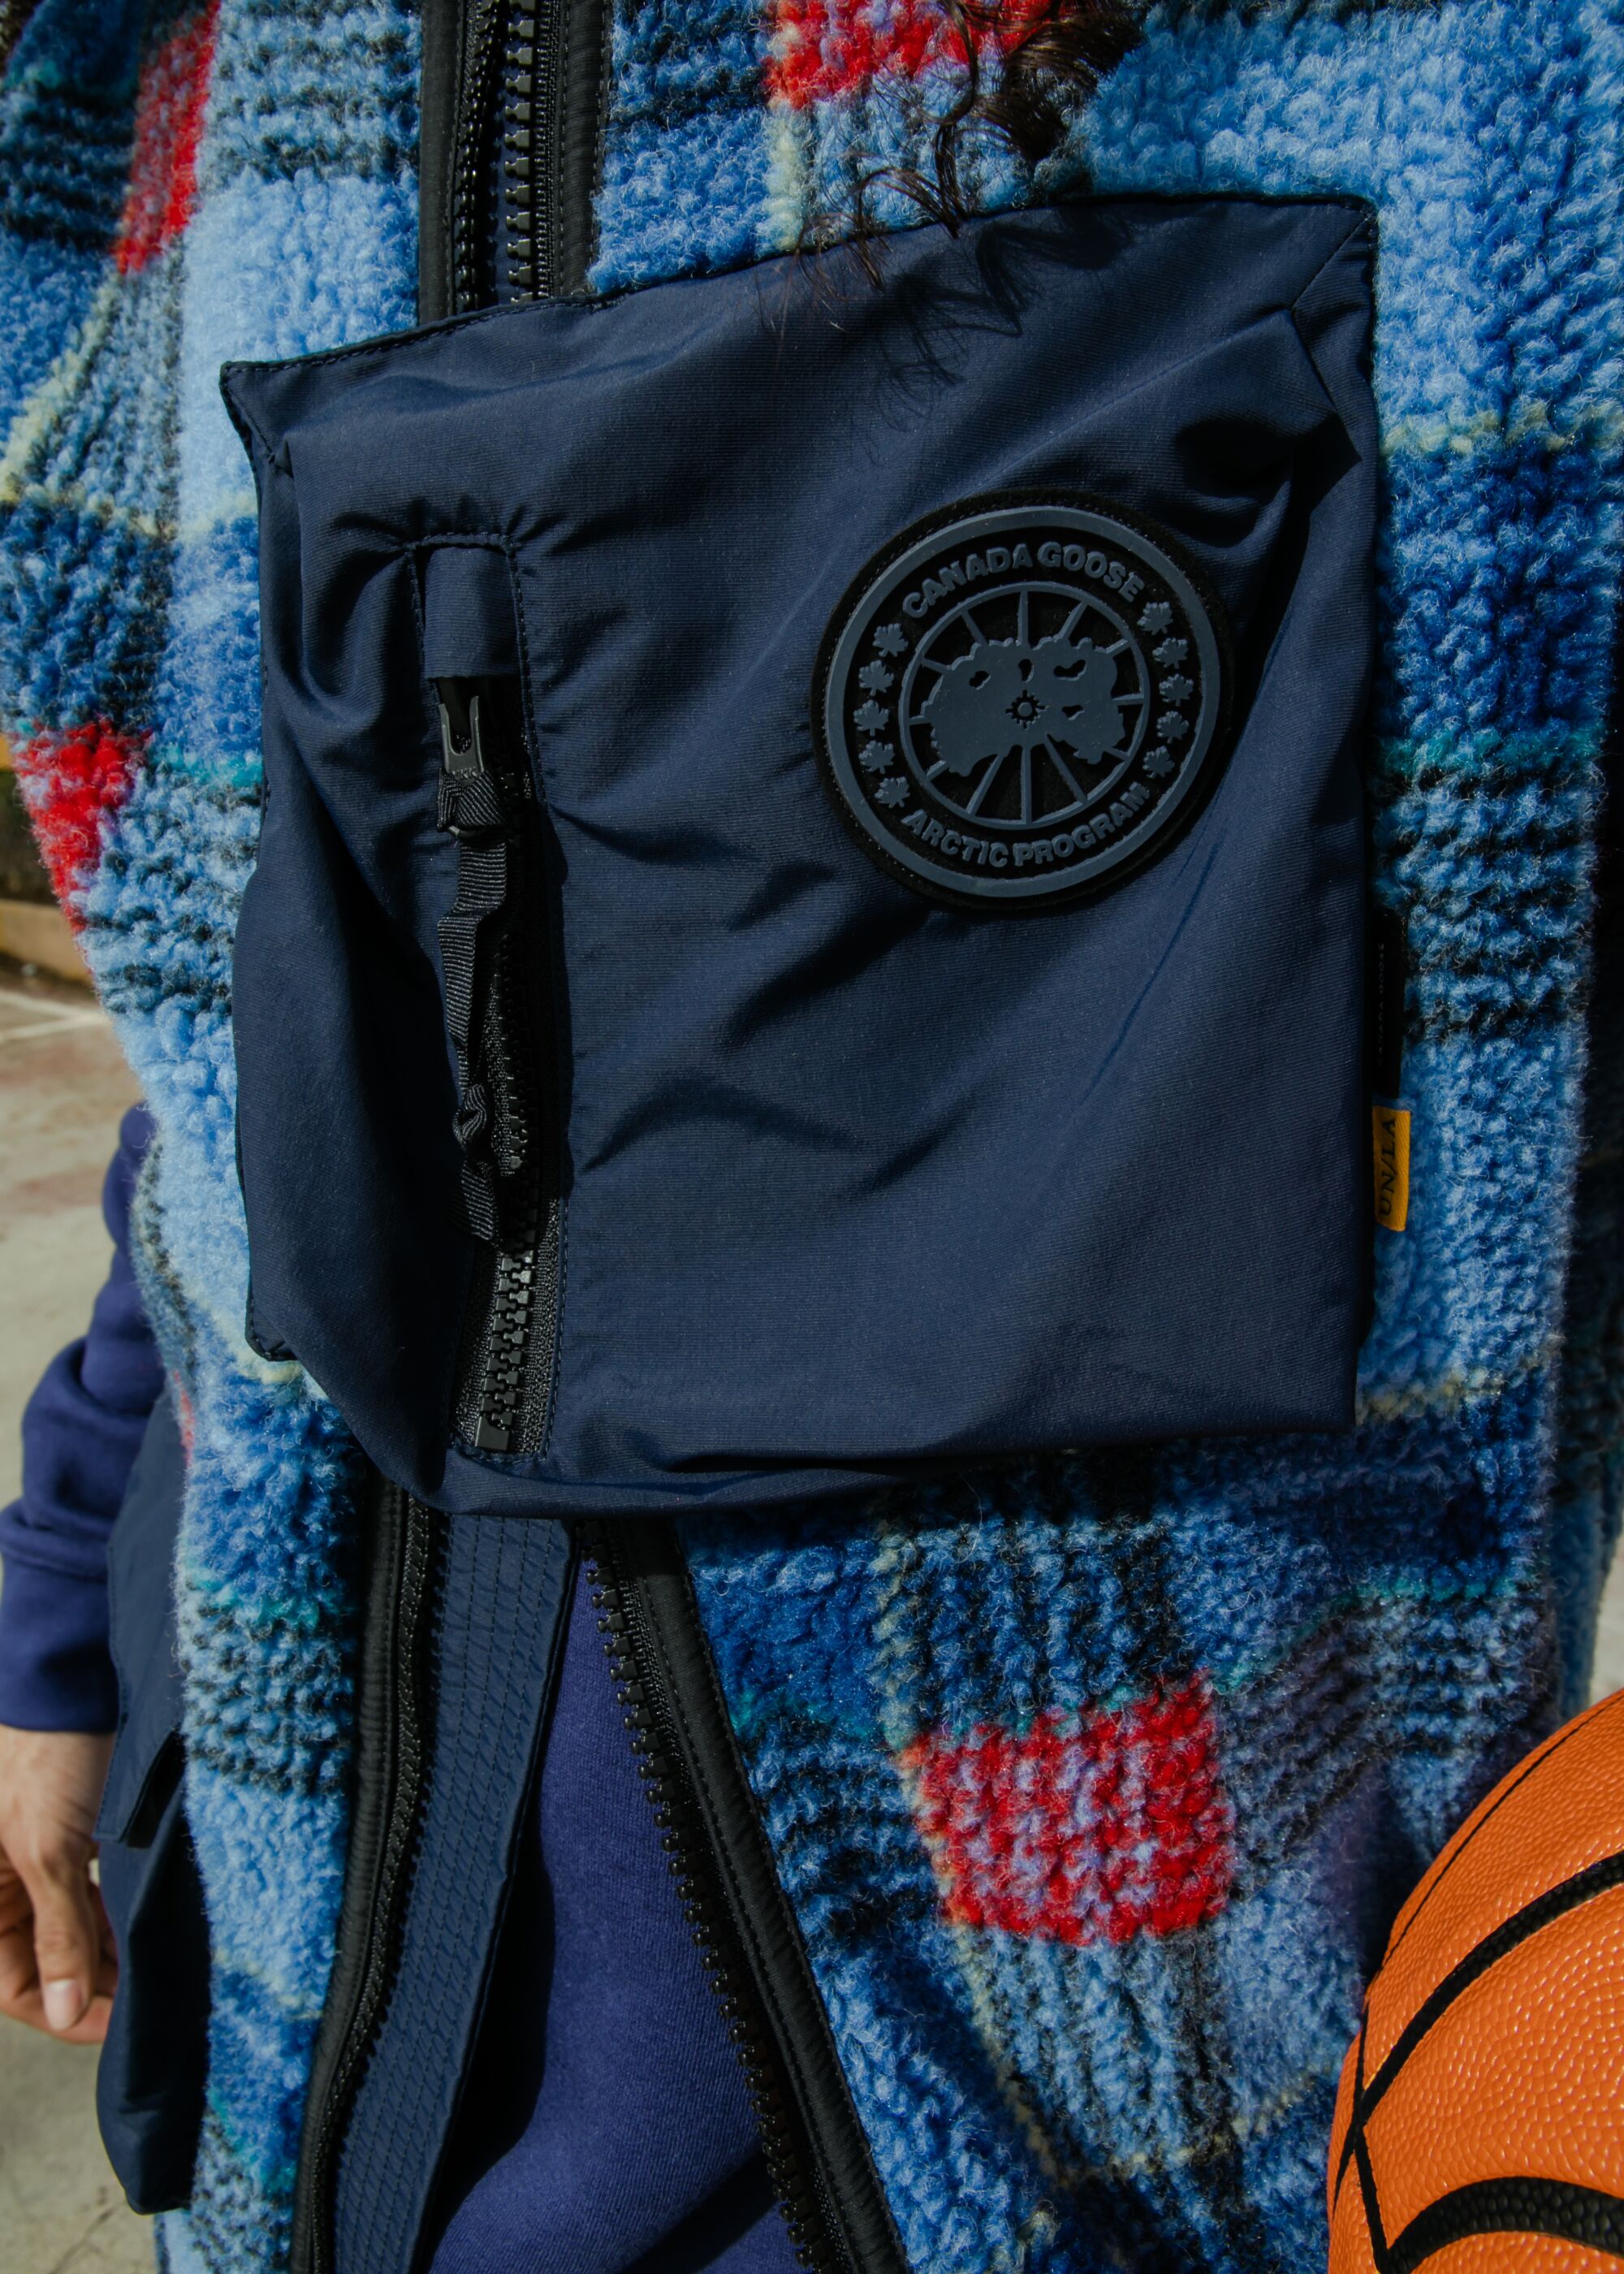 Close-up of a blue tartan vest with a solid blue panel.